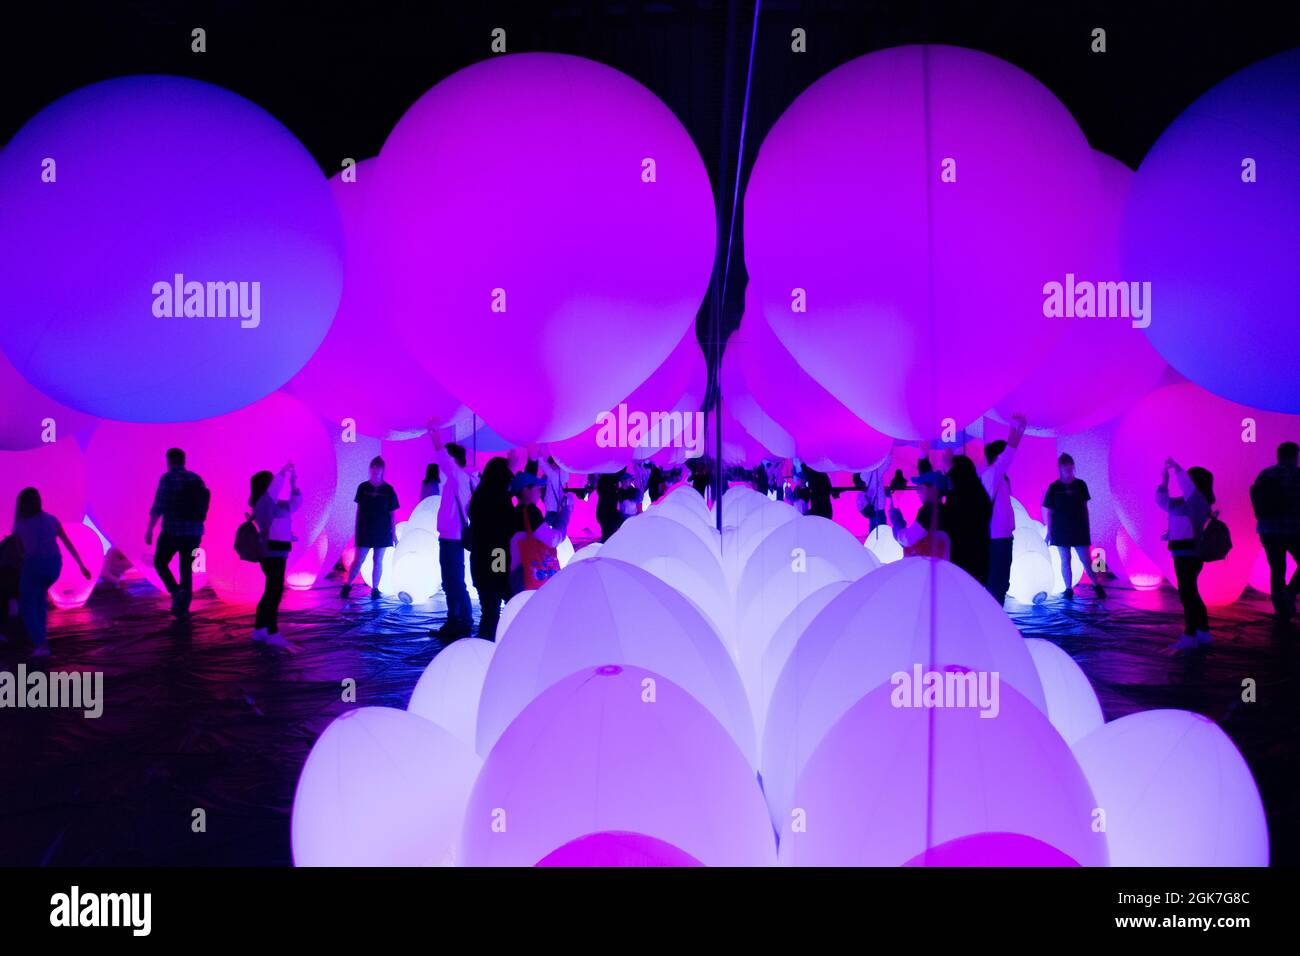 People silhouetted by the extraordinary light displays at the Team Lab Borderless Digital Art Museum, Tokyo, Japan, October Stock Photo